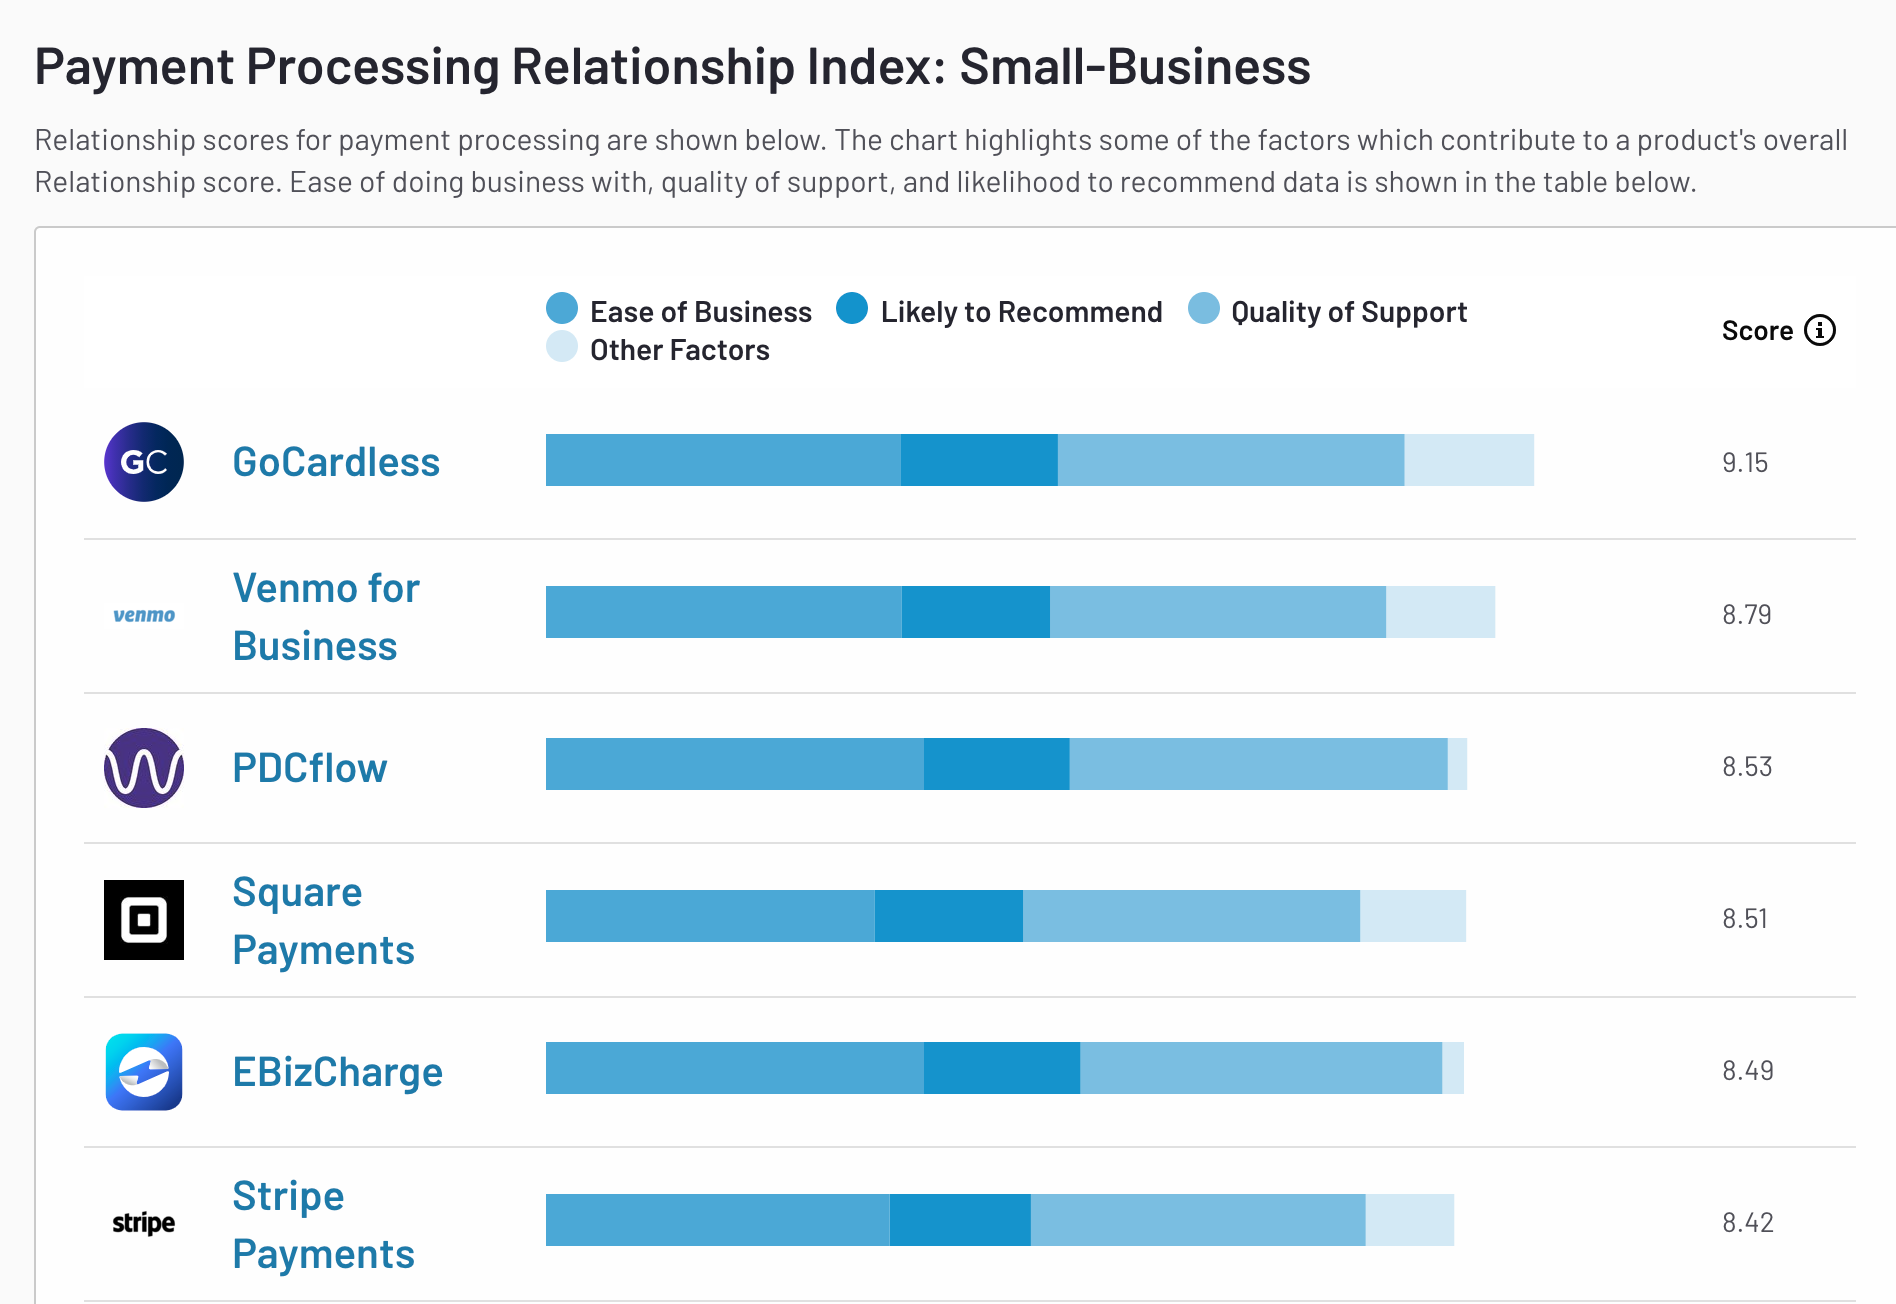 SB Payment Processing Relationship Index